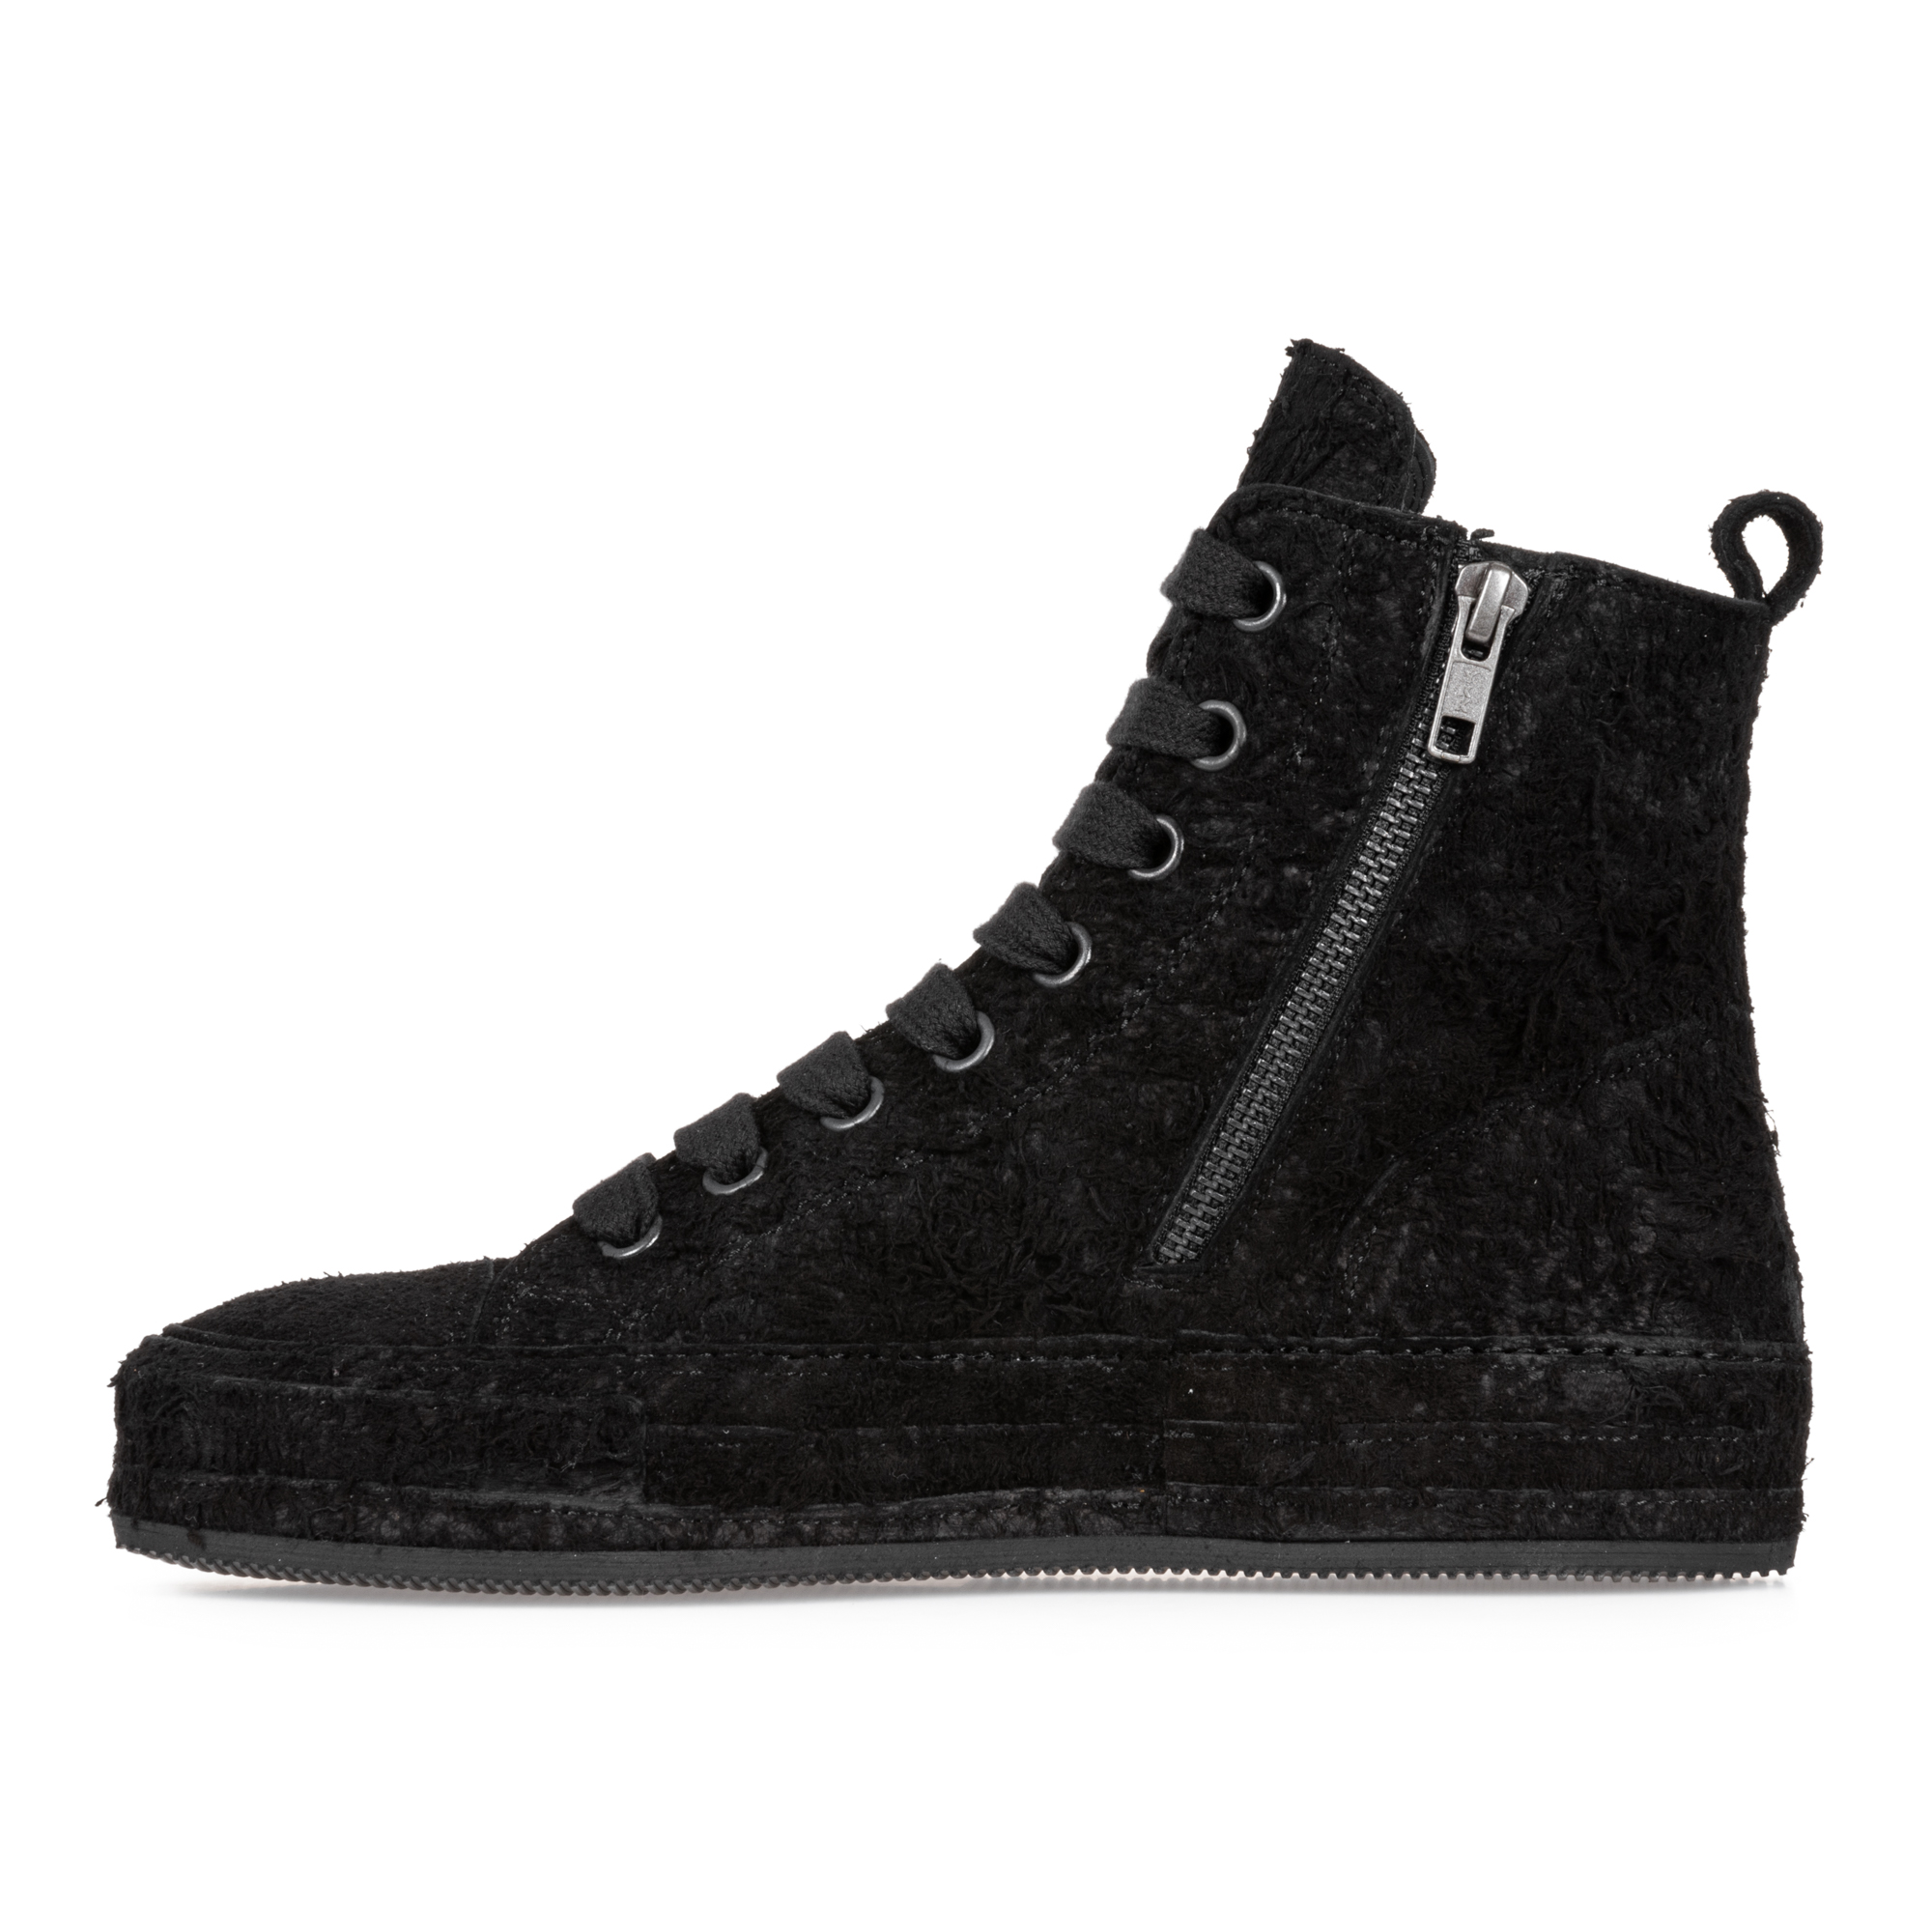 BLACK W SUEDE LEATHER HIGH TOP SNEAKERS|wolfensson